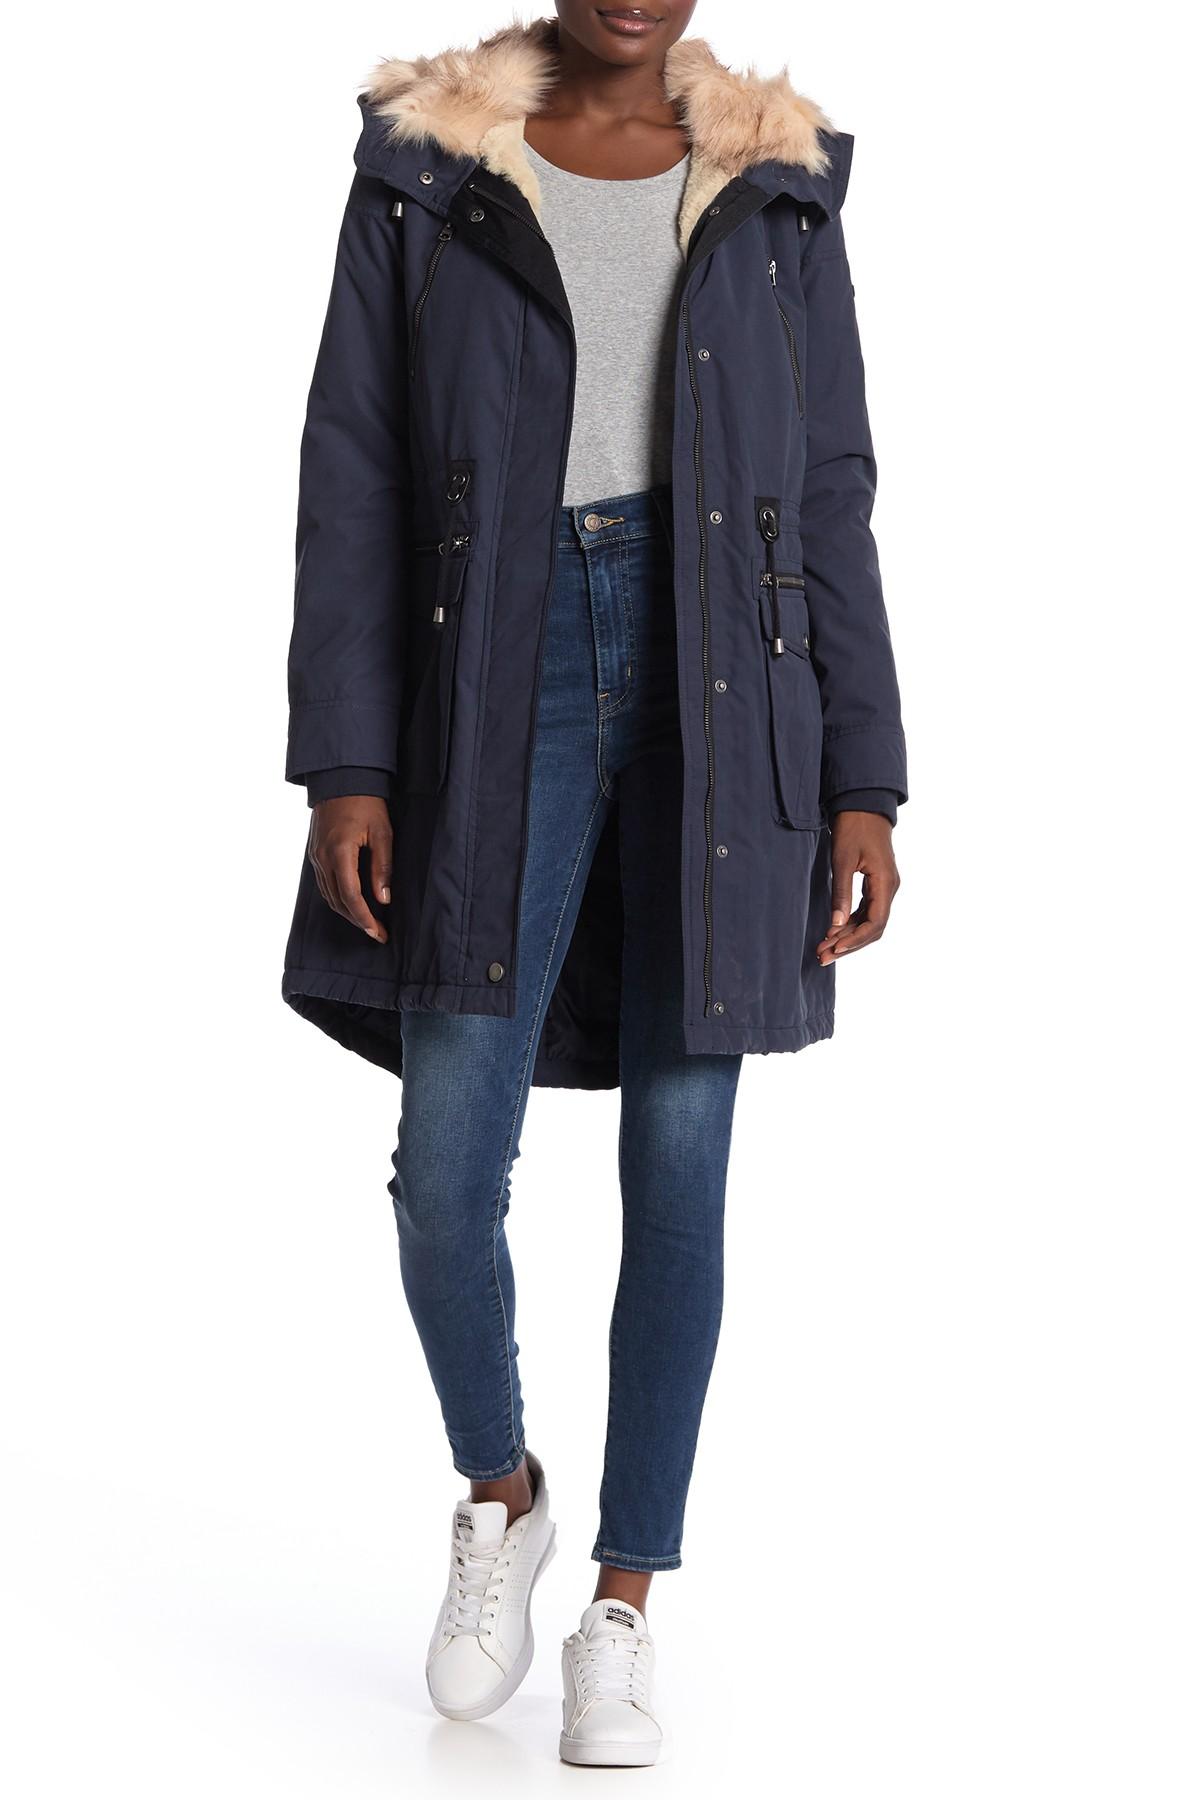 Lucky Brand Faux Fur Lined Parka in Blue